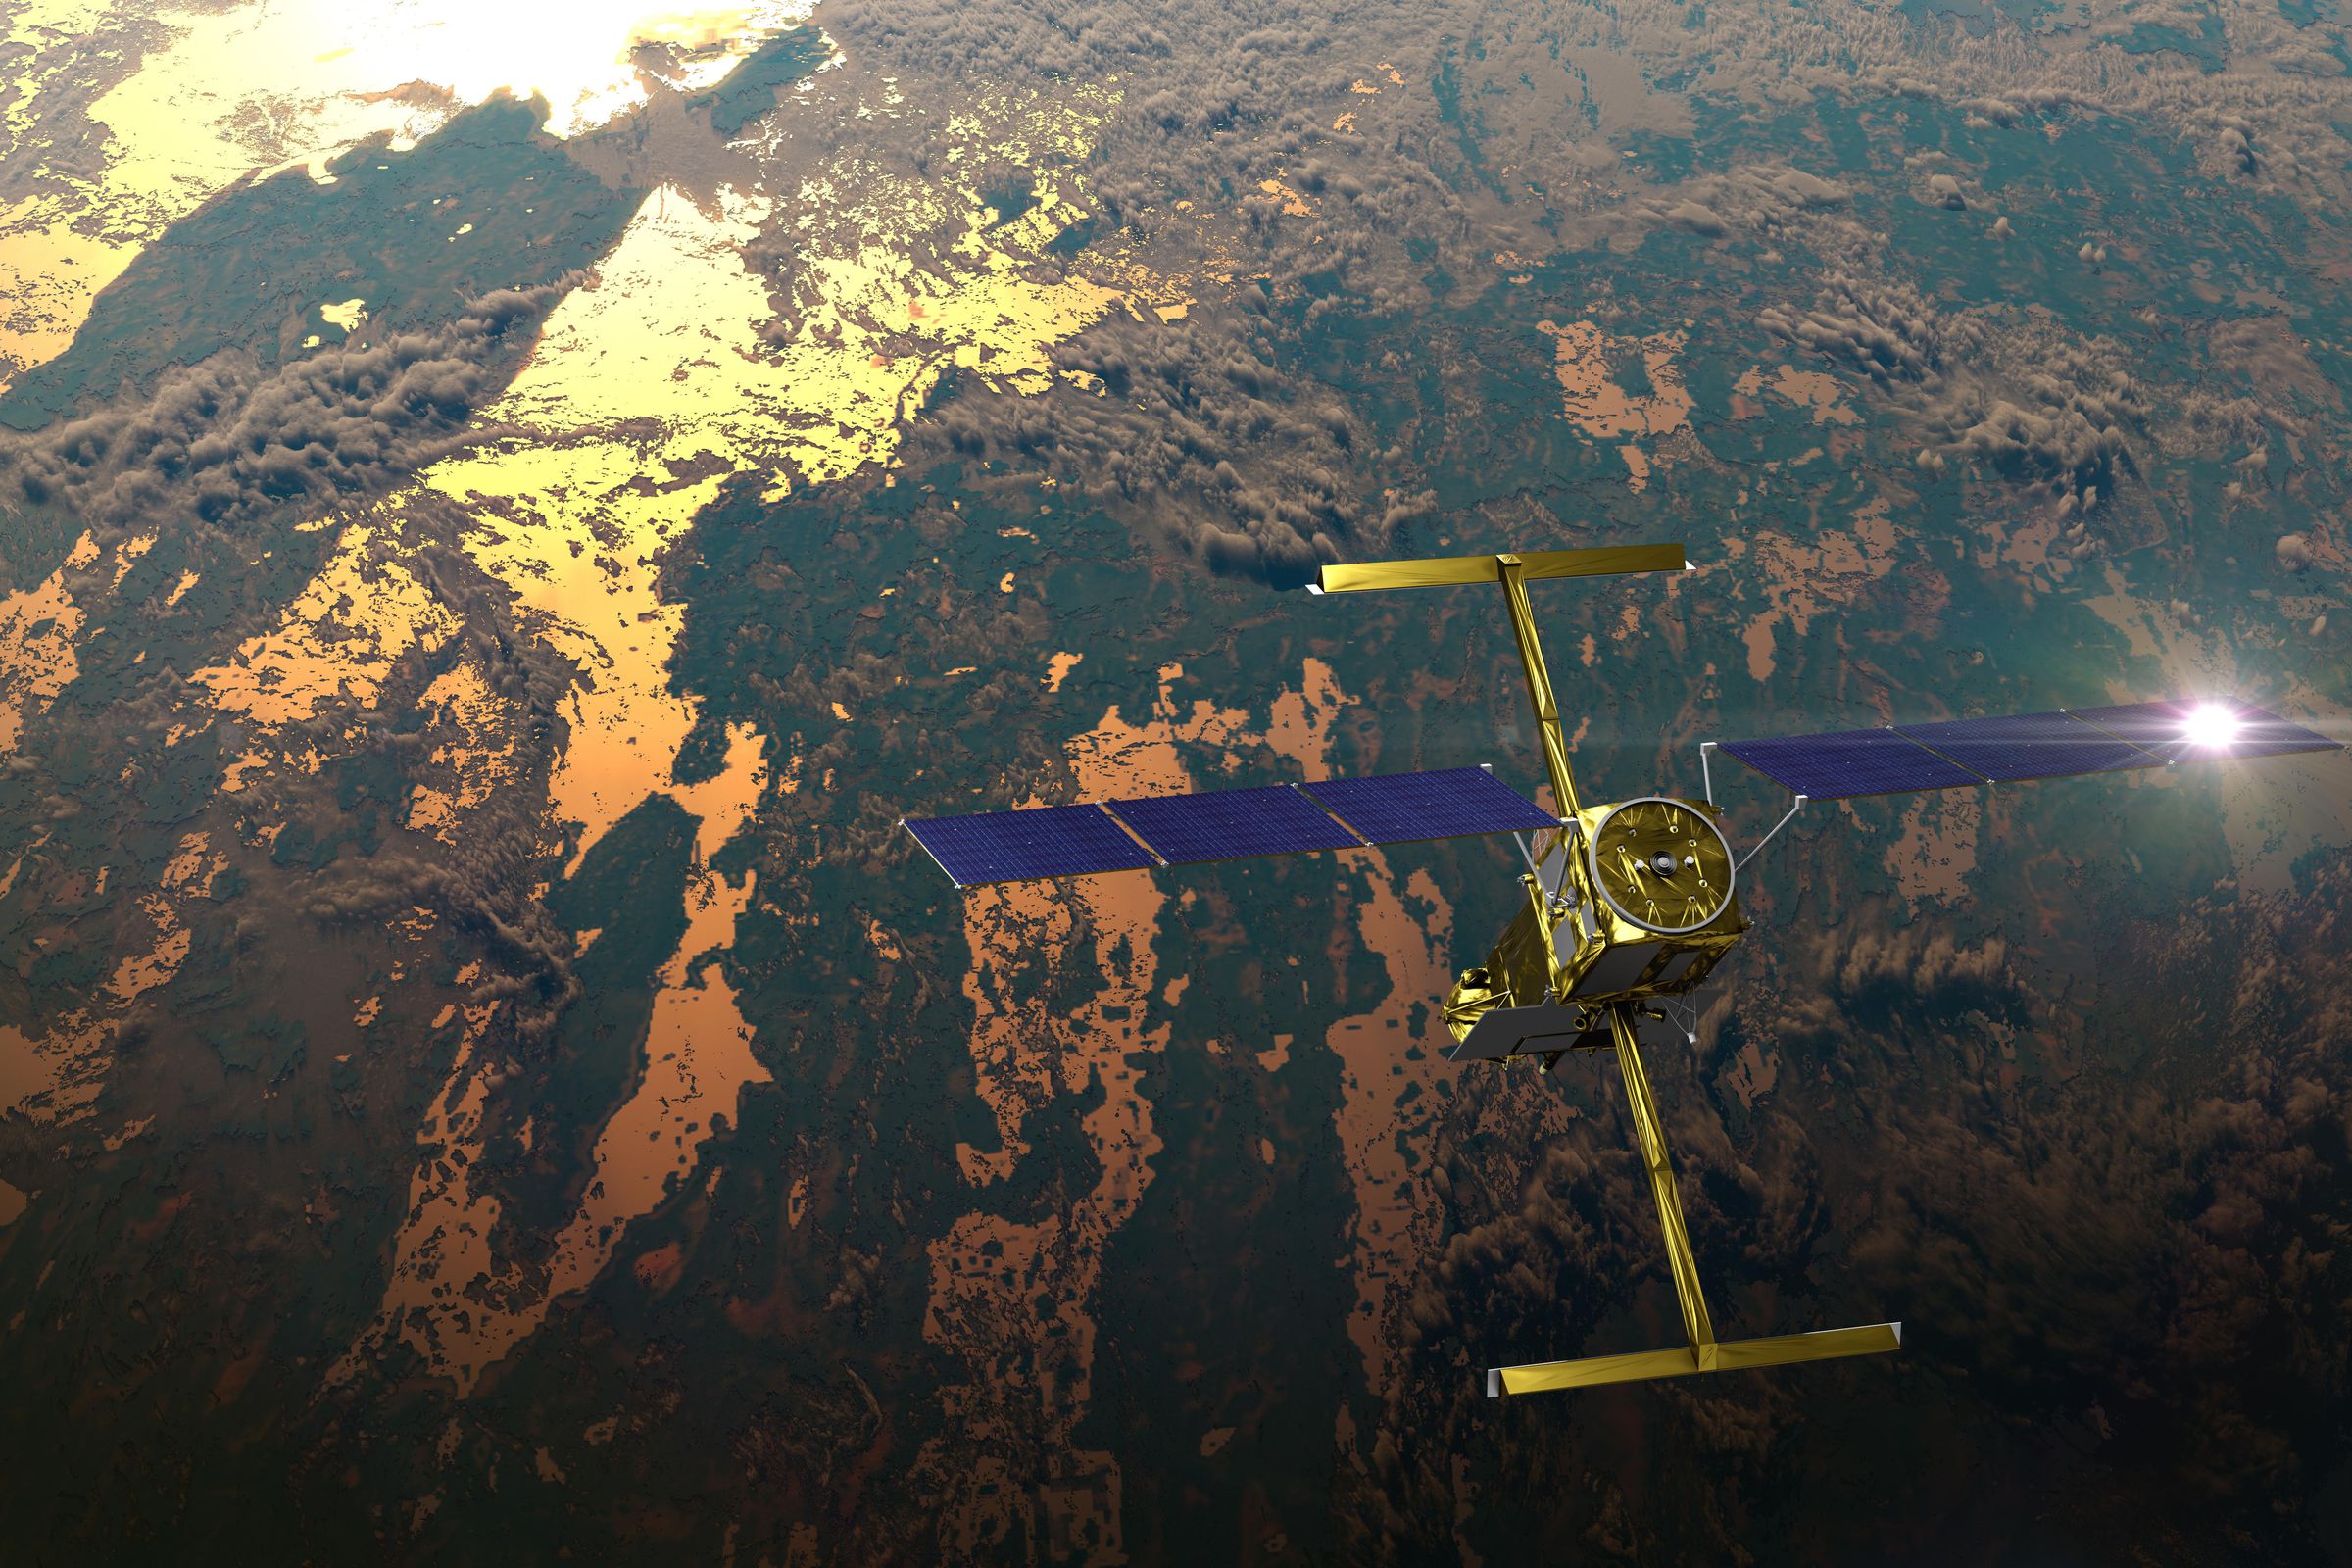 A gold satellite soars above Earth. Below, the sun glints off a body of water. Some clouds dot the sky beneath the satellite.